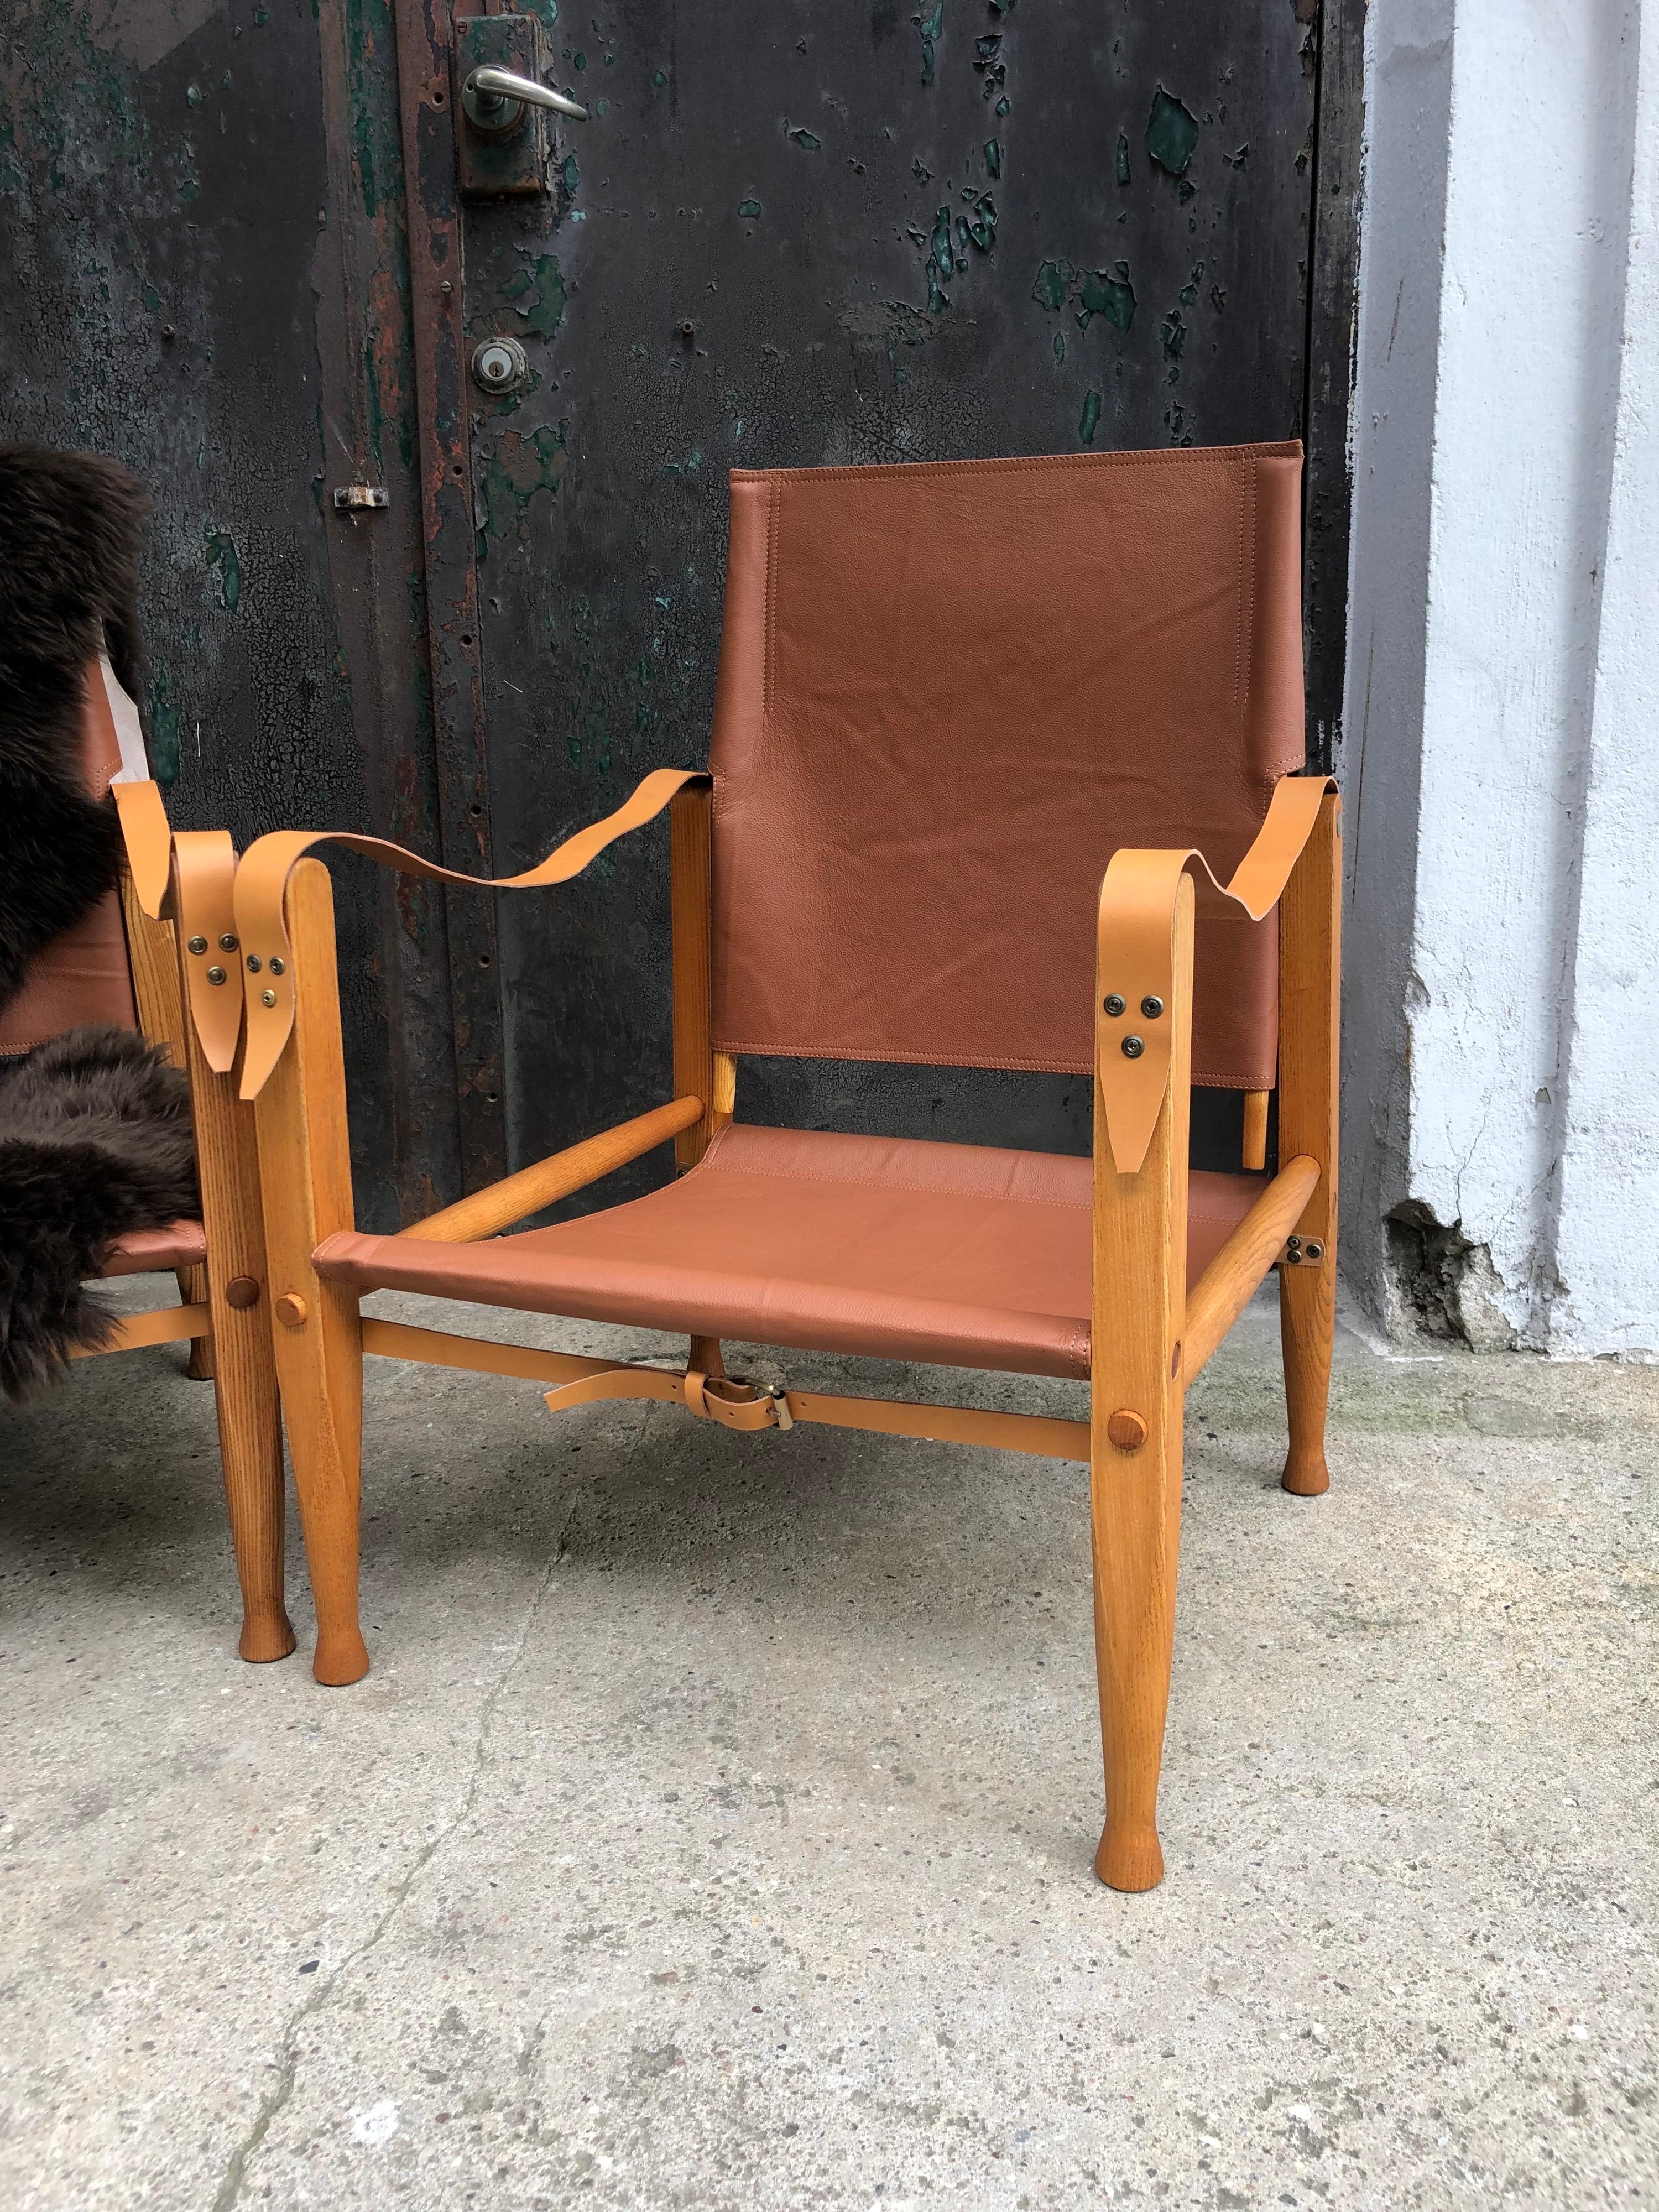 Pair of Vintage Refurbished Kaare Klint Safari Chairs from the 1960s For Sale 10